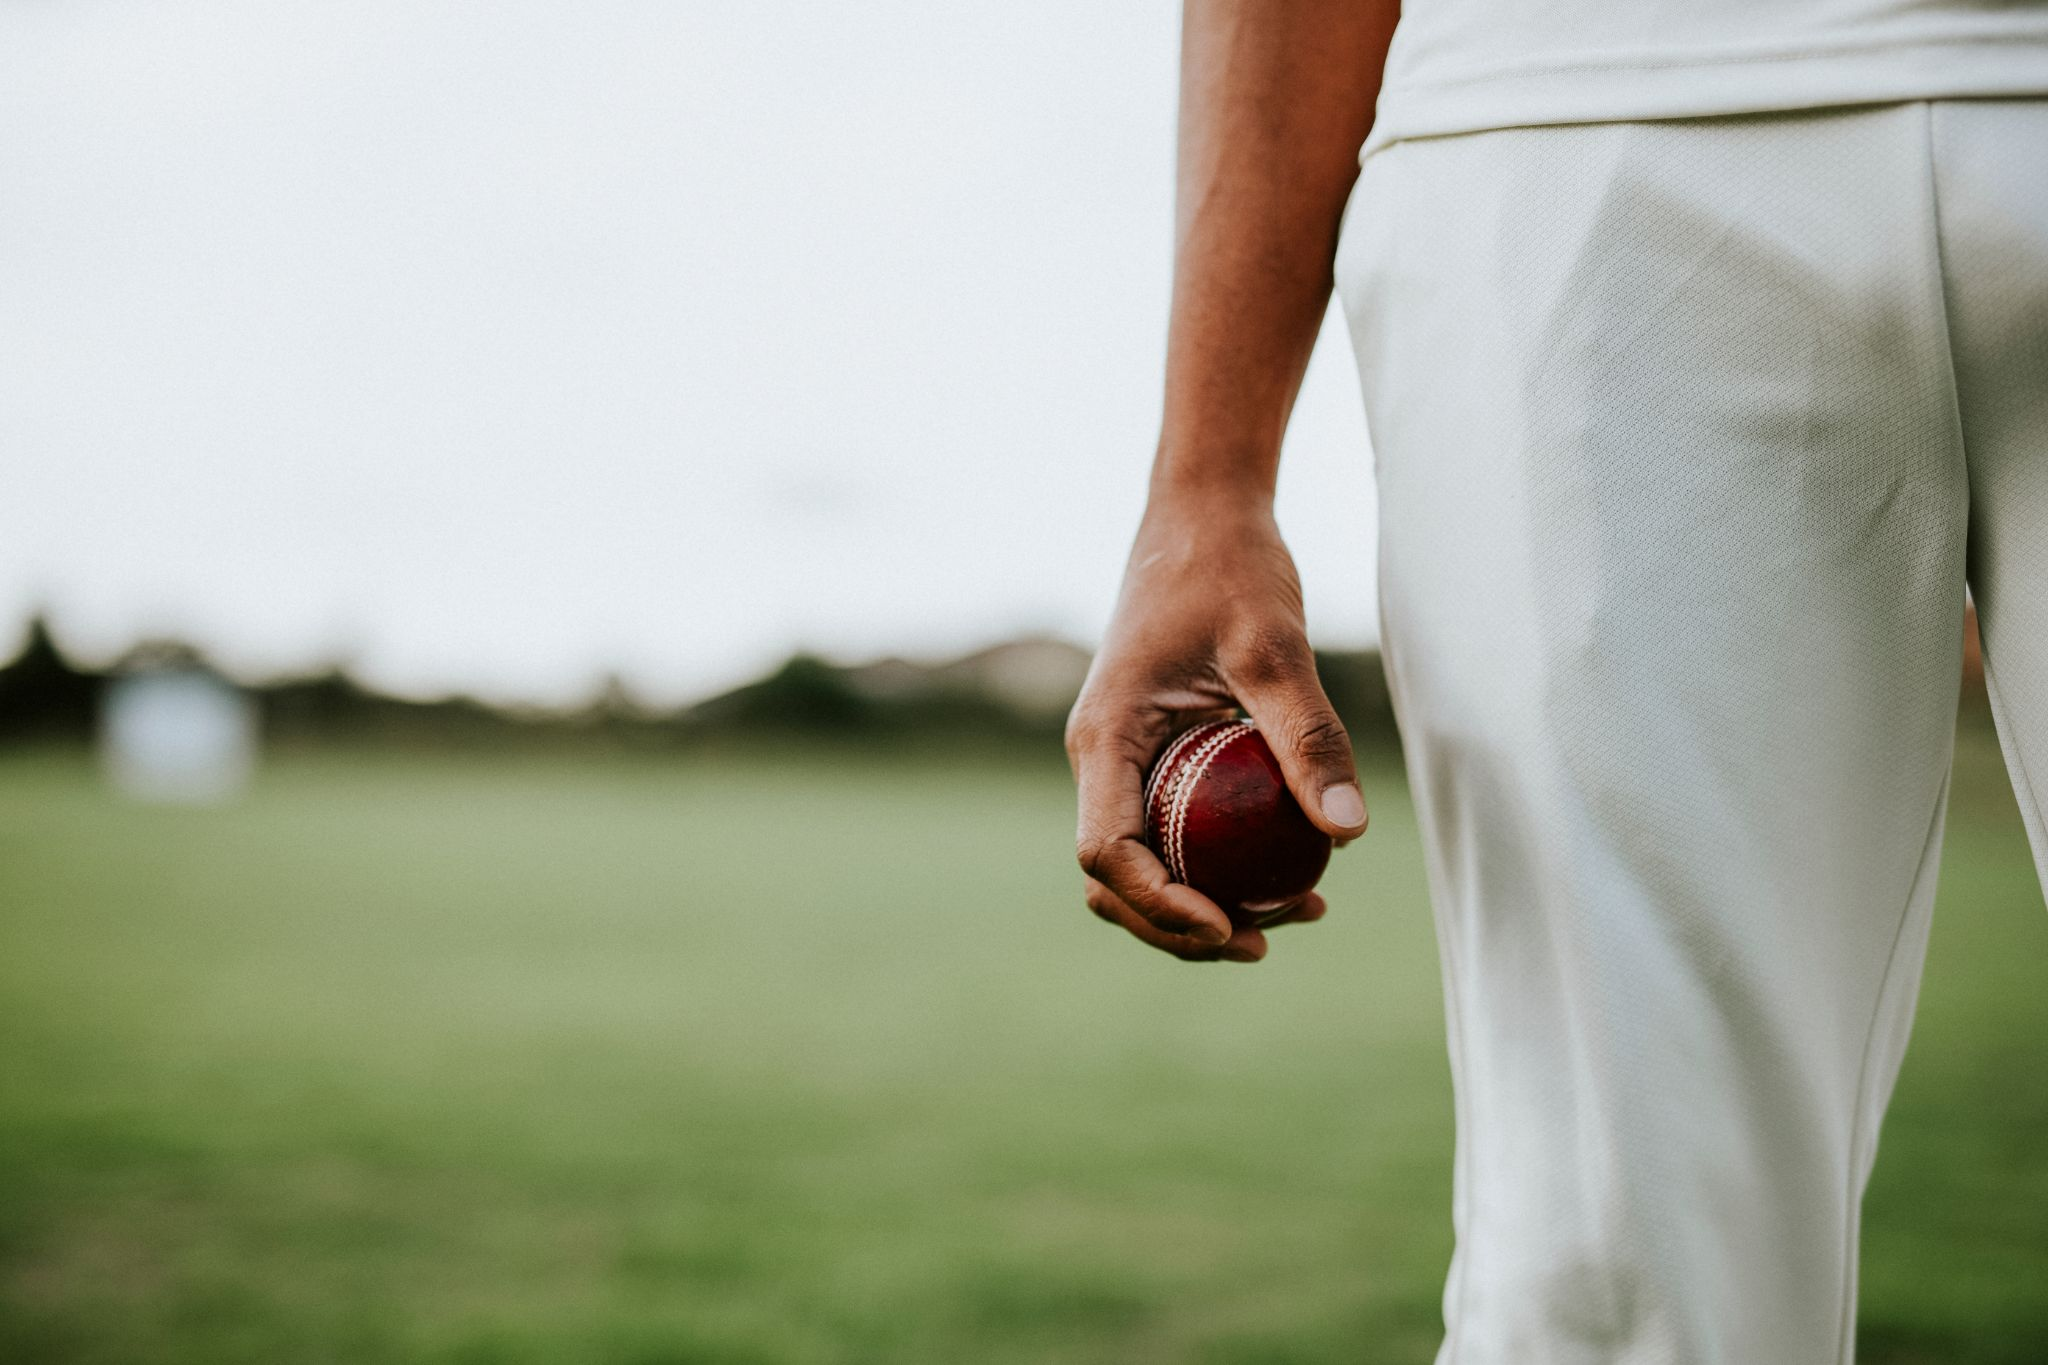 A cricket player holding a leather ball